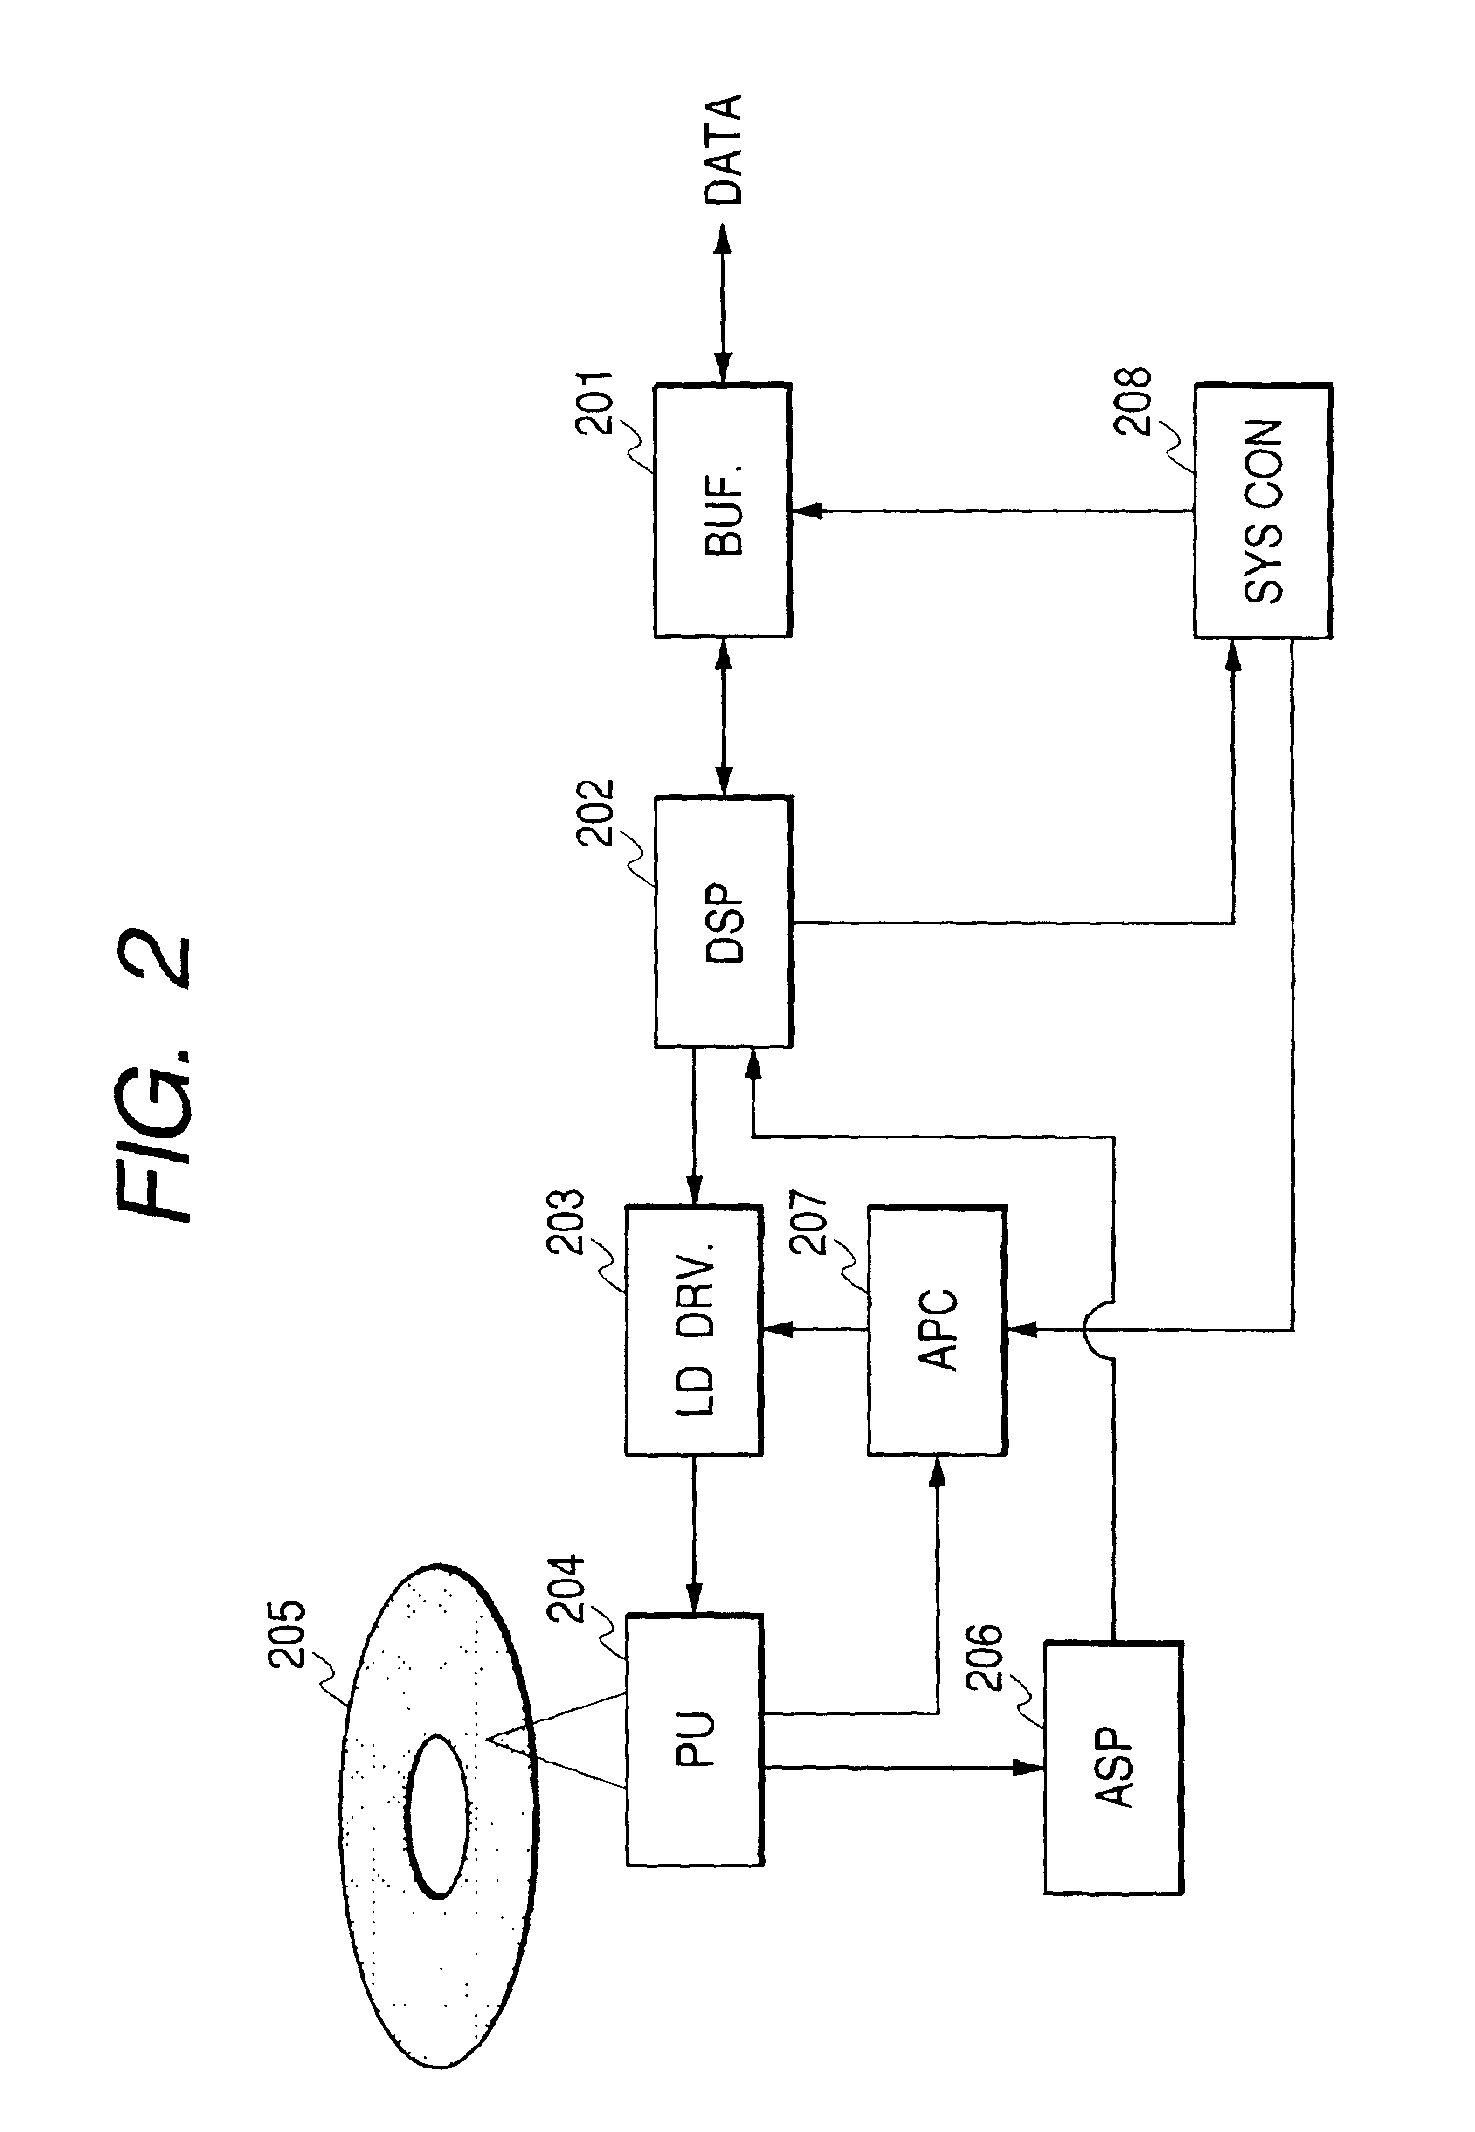 Optical disc recording method and optical disc drive